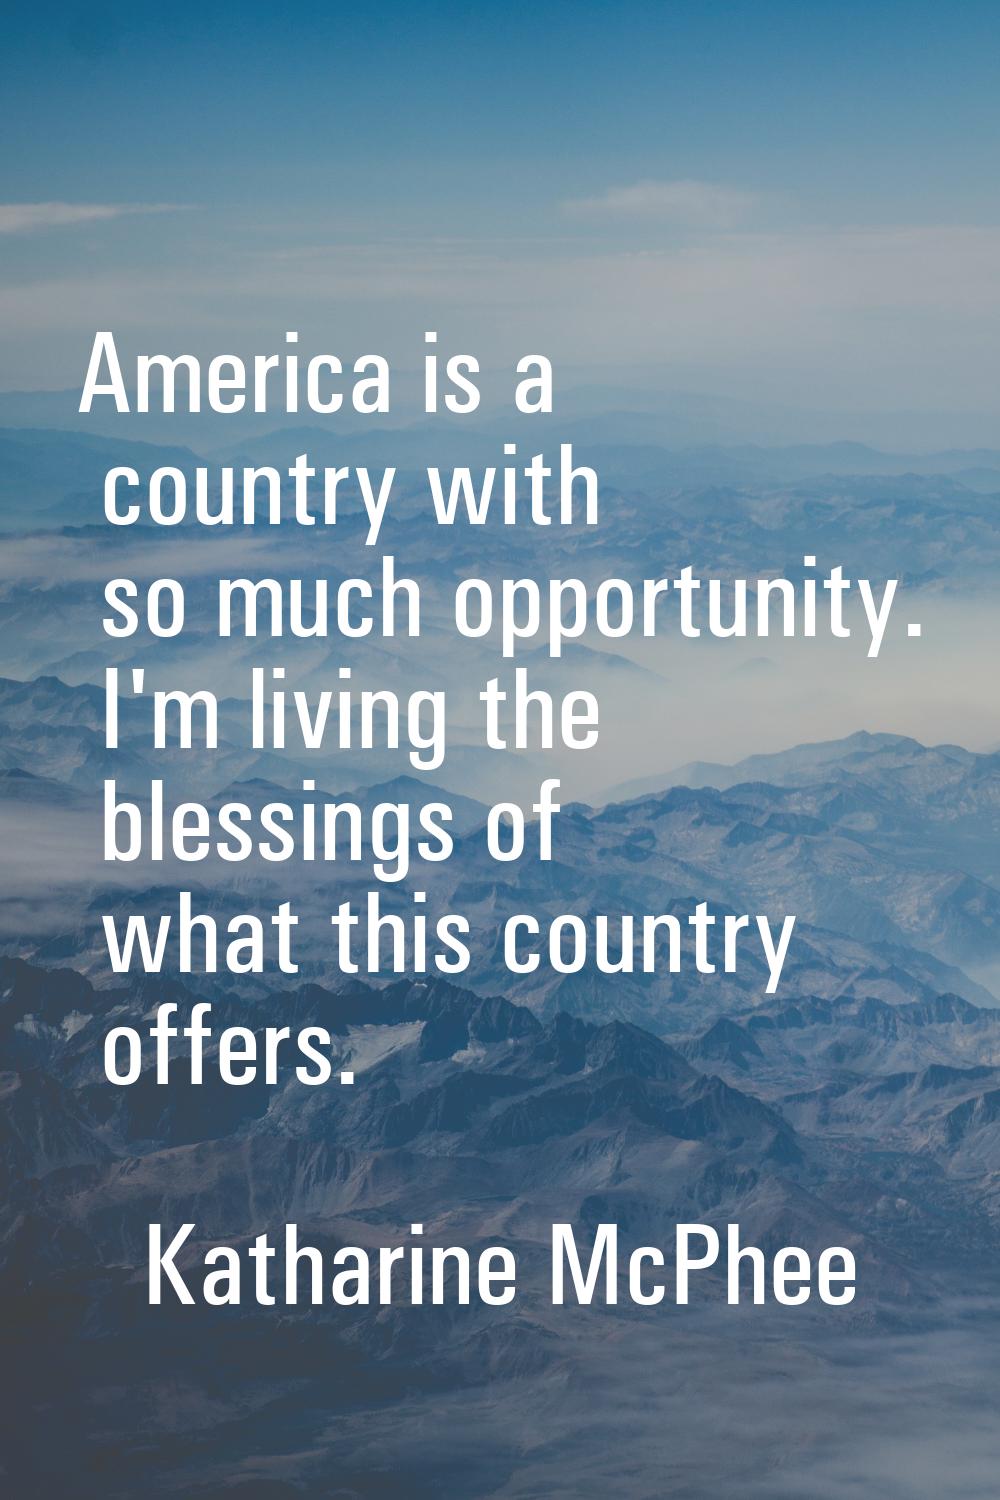 America is a country with so much opportunity. I'm living the blessings of what this country offers